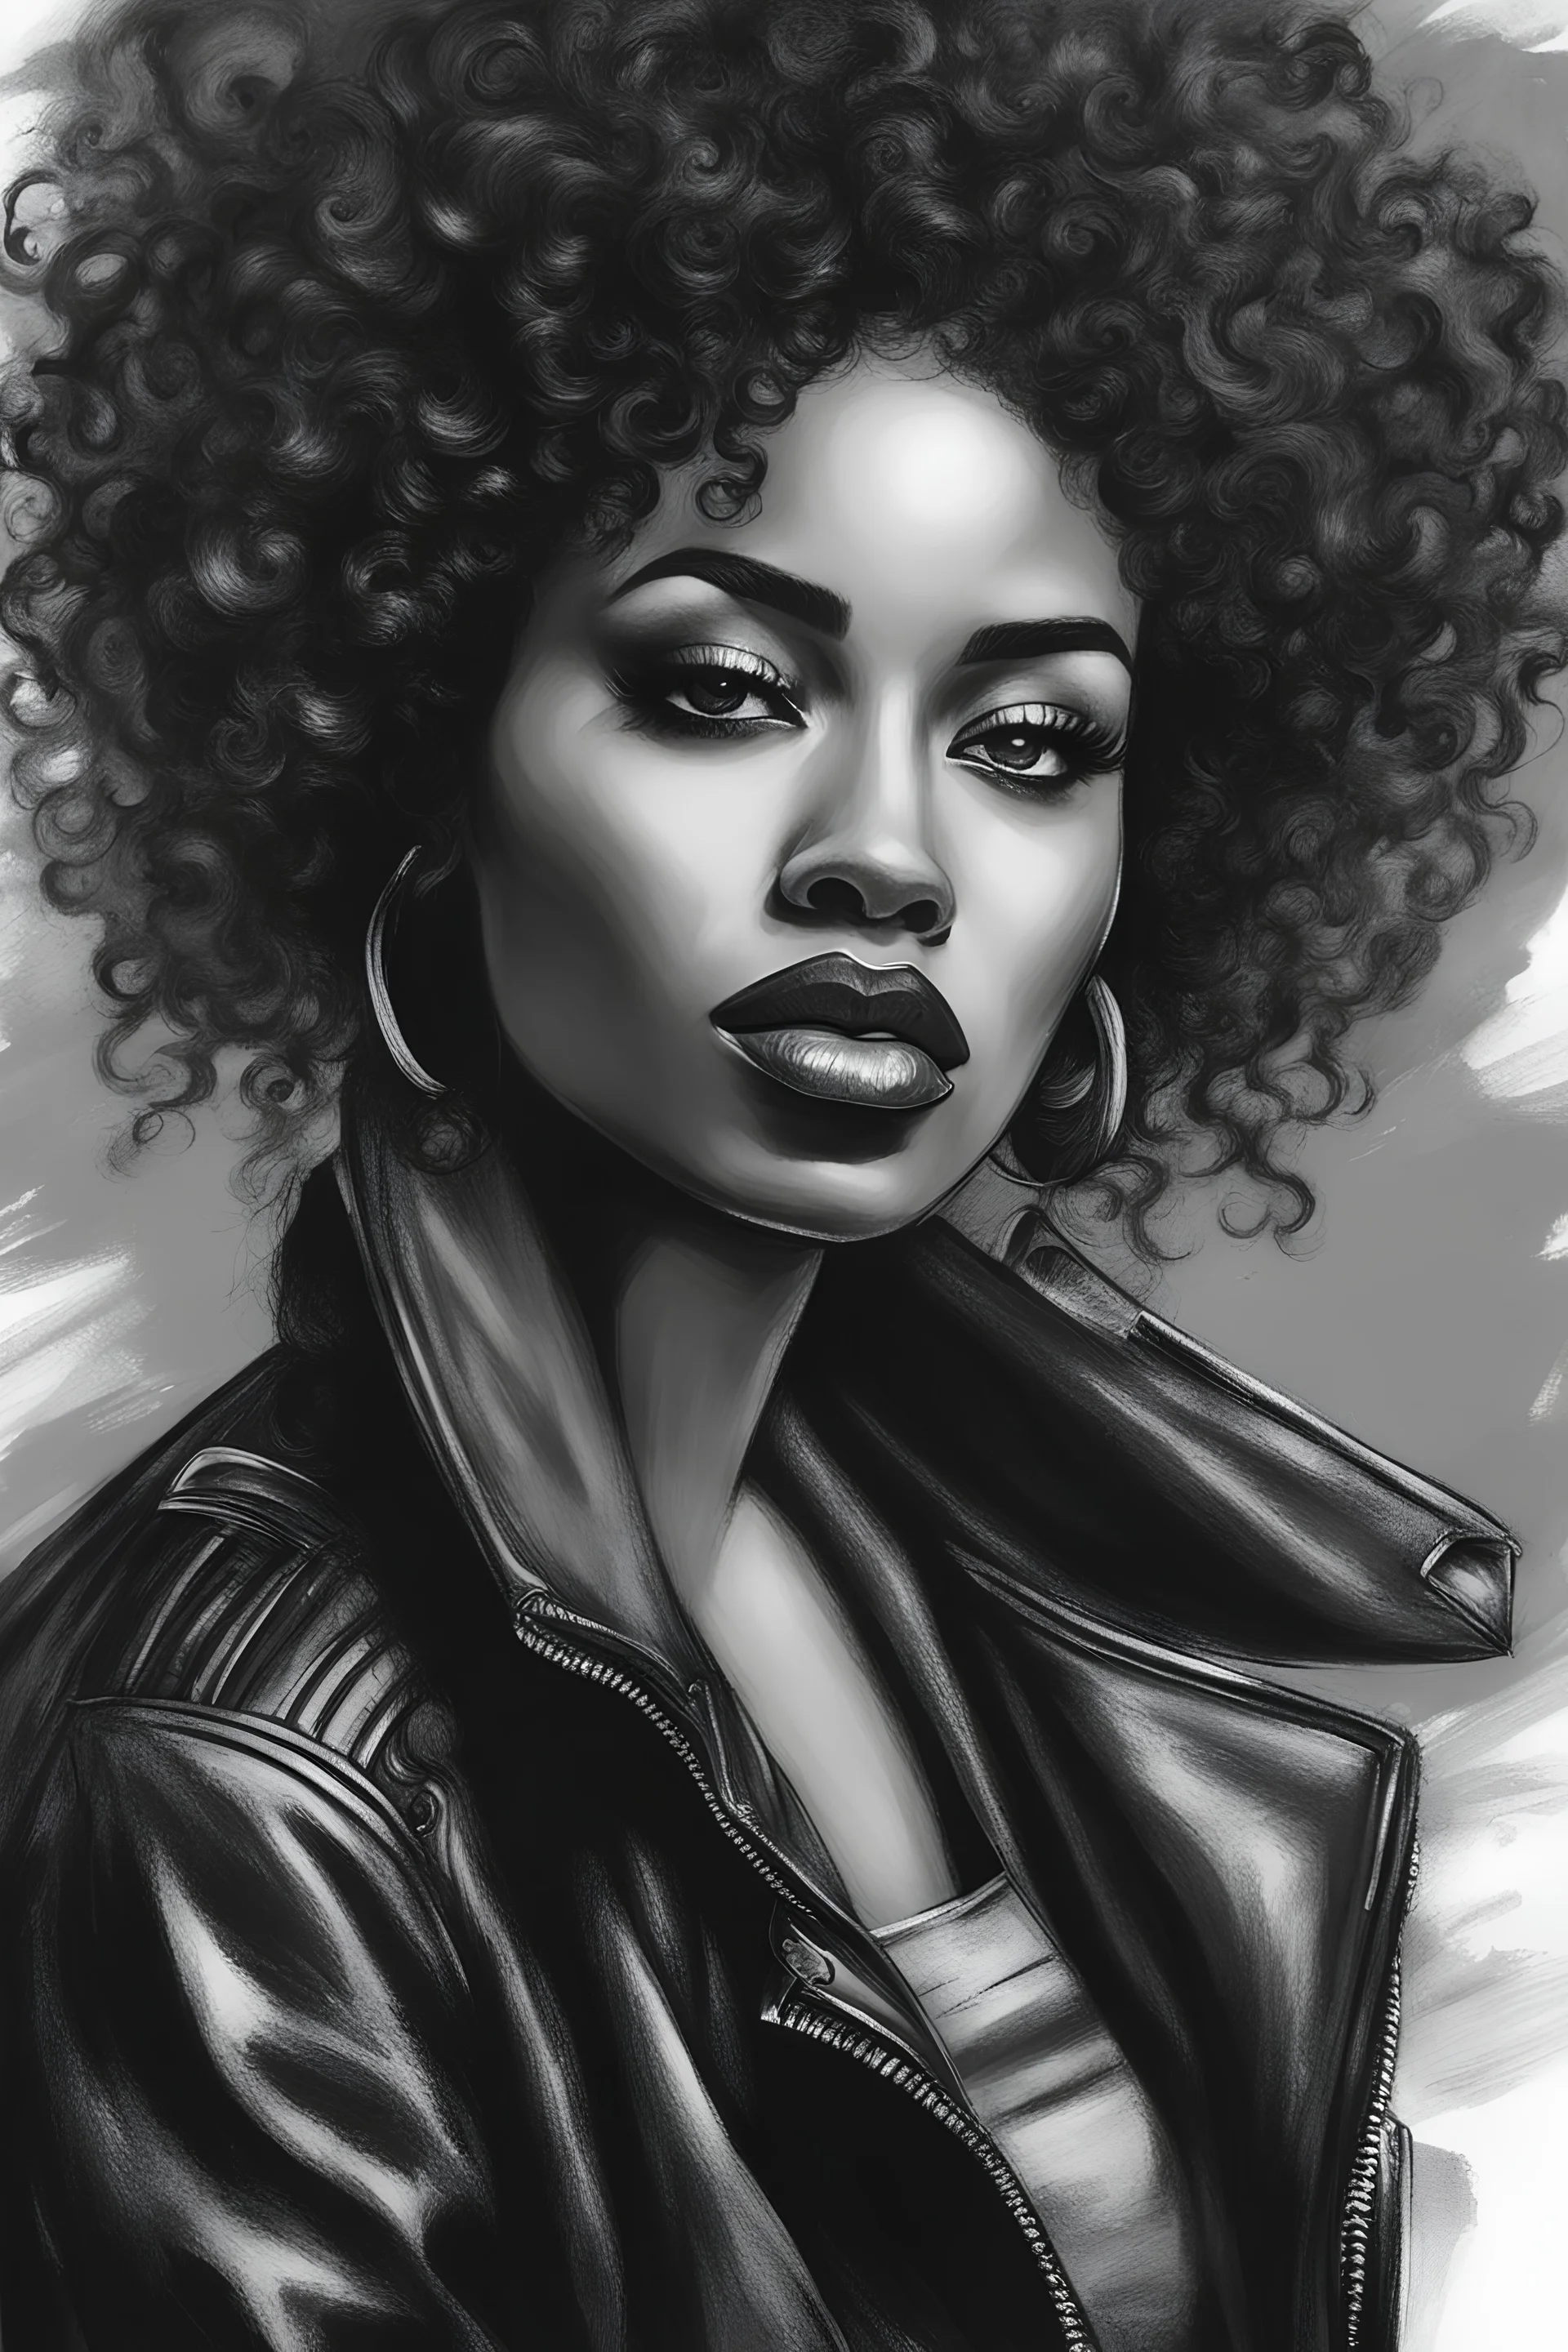 Black and white charcoal drawing of a beautiful black woman with a striking, edgy curly look. She has a short, modern curly hairstyle with textured layers. Her makeup is bold and dramatic, with thick eyelashes that enhance her expressive eyes and is wearing a leather jacket.